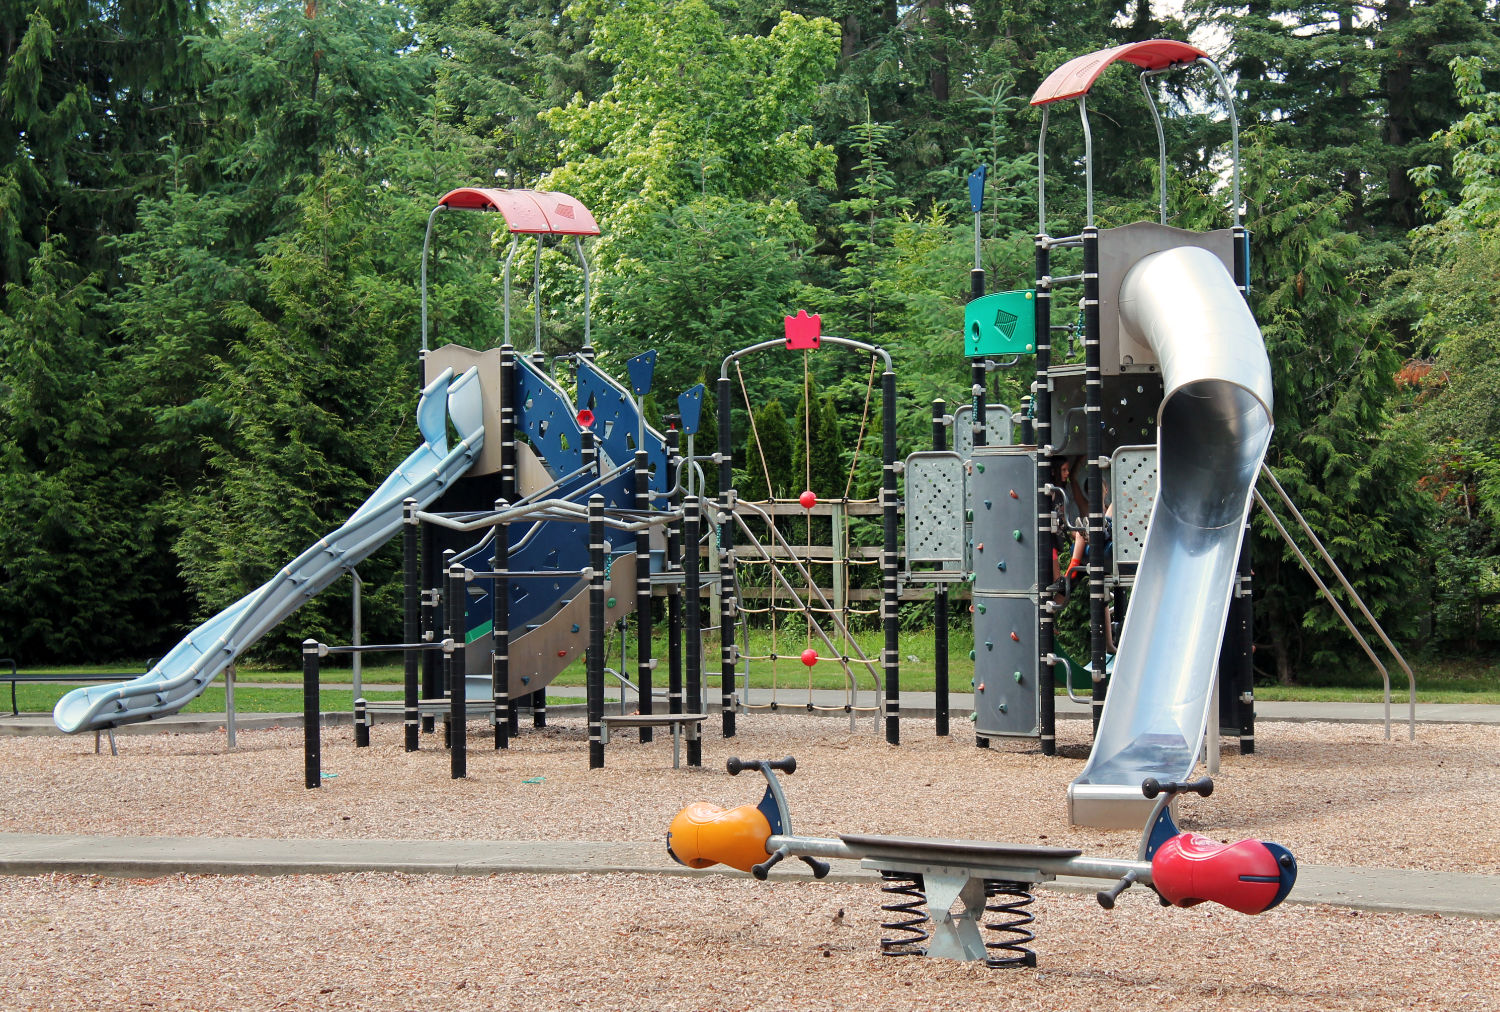 ebright creek park playground, including slides and small climbing wall